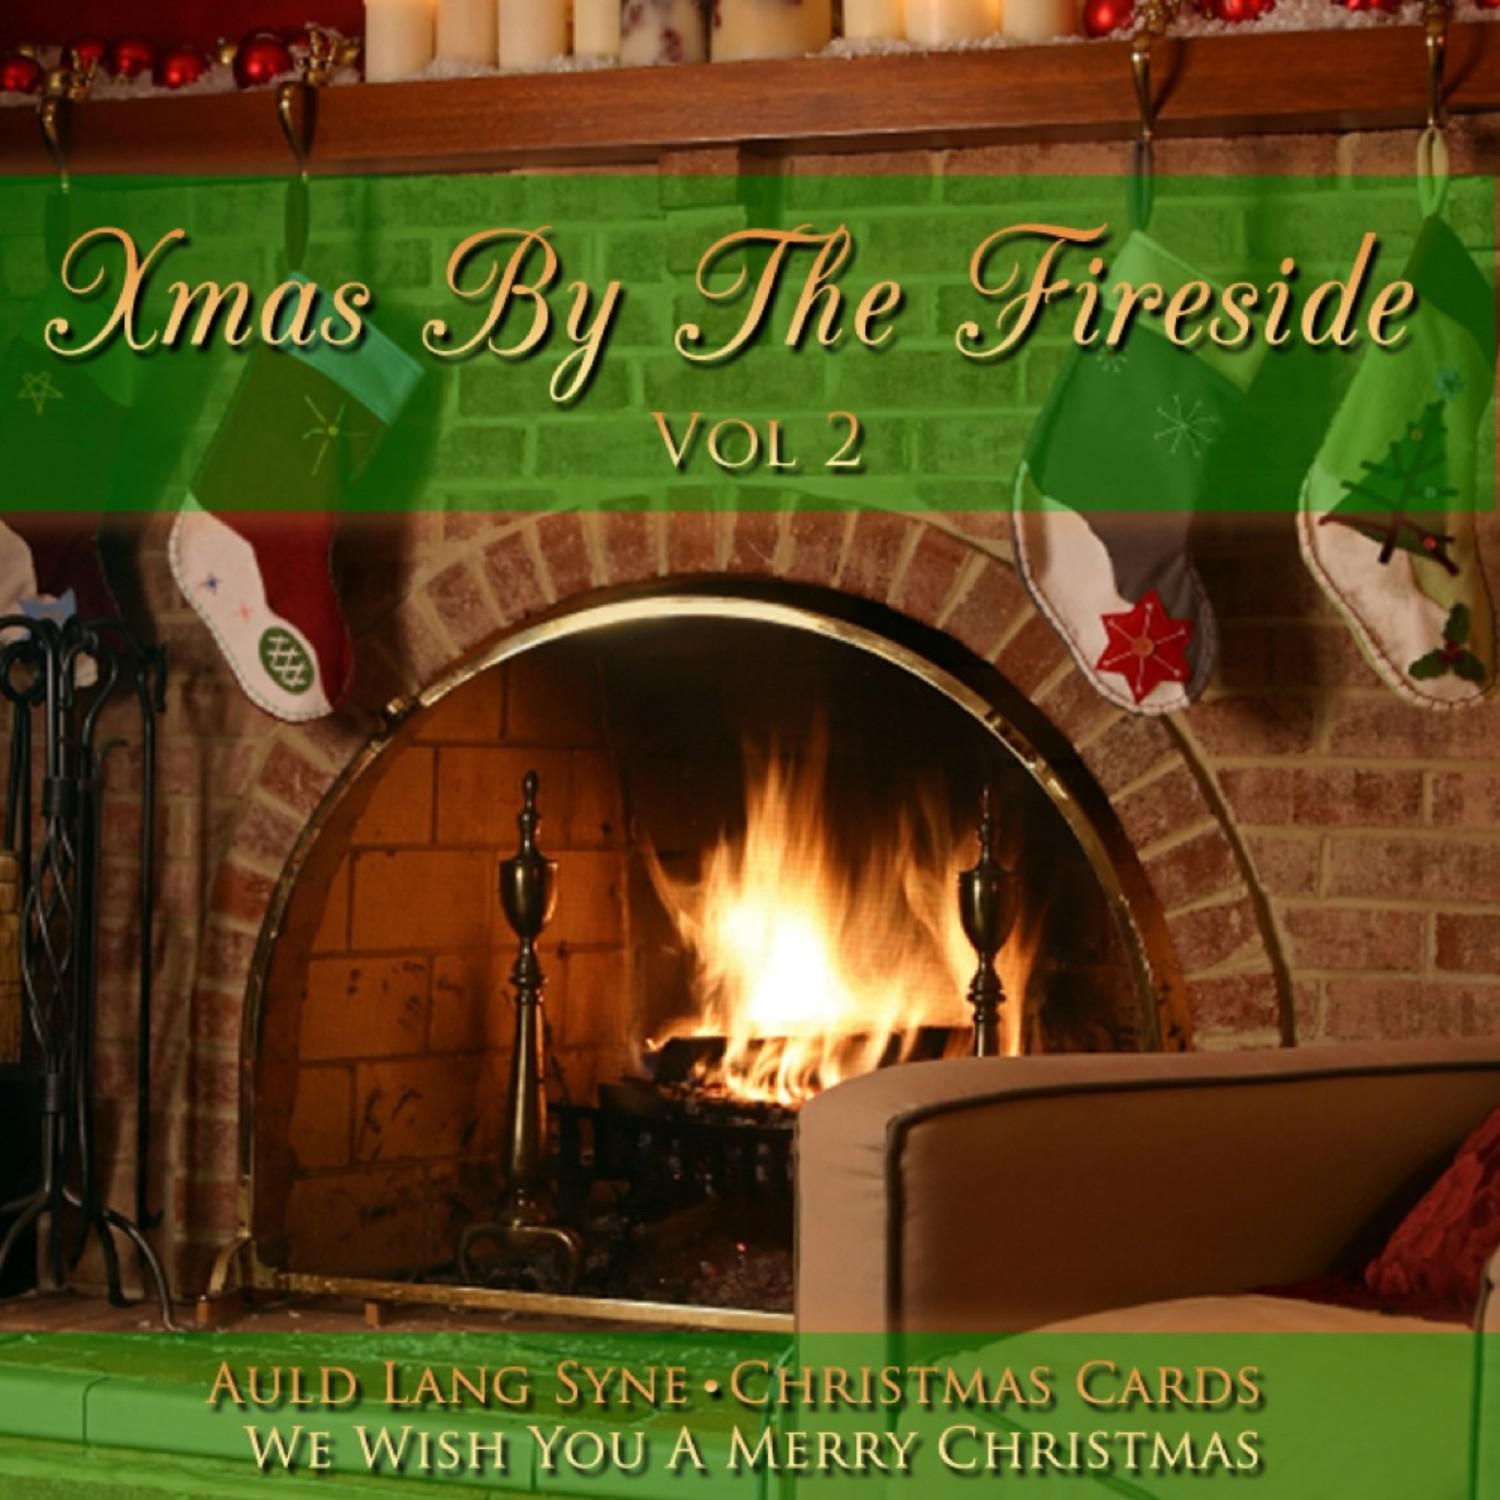 Xmas By The Fireside Vol 2